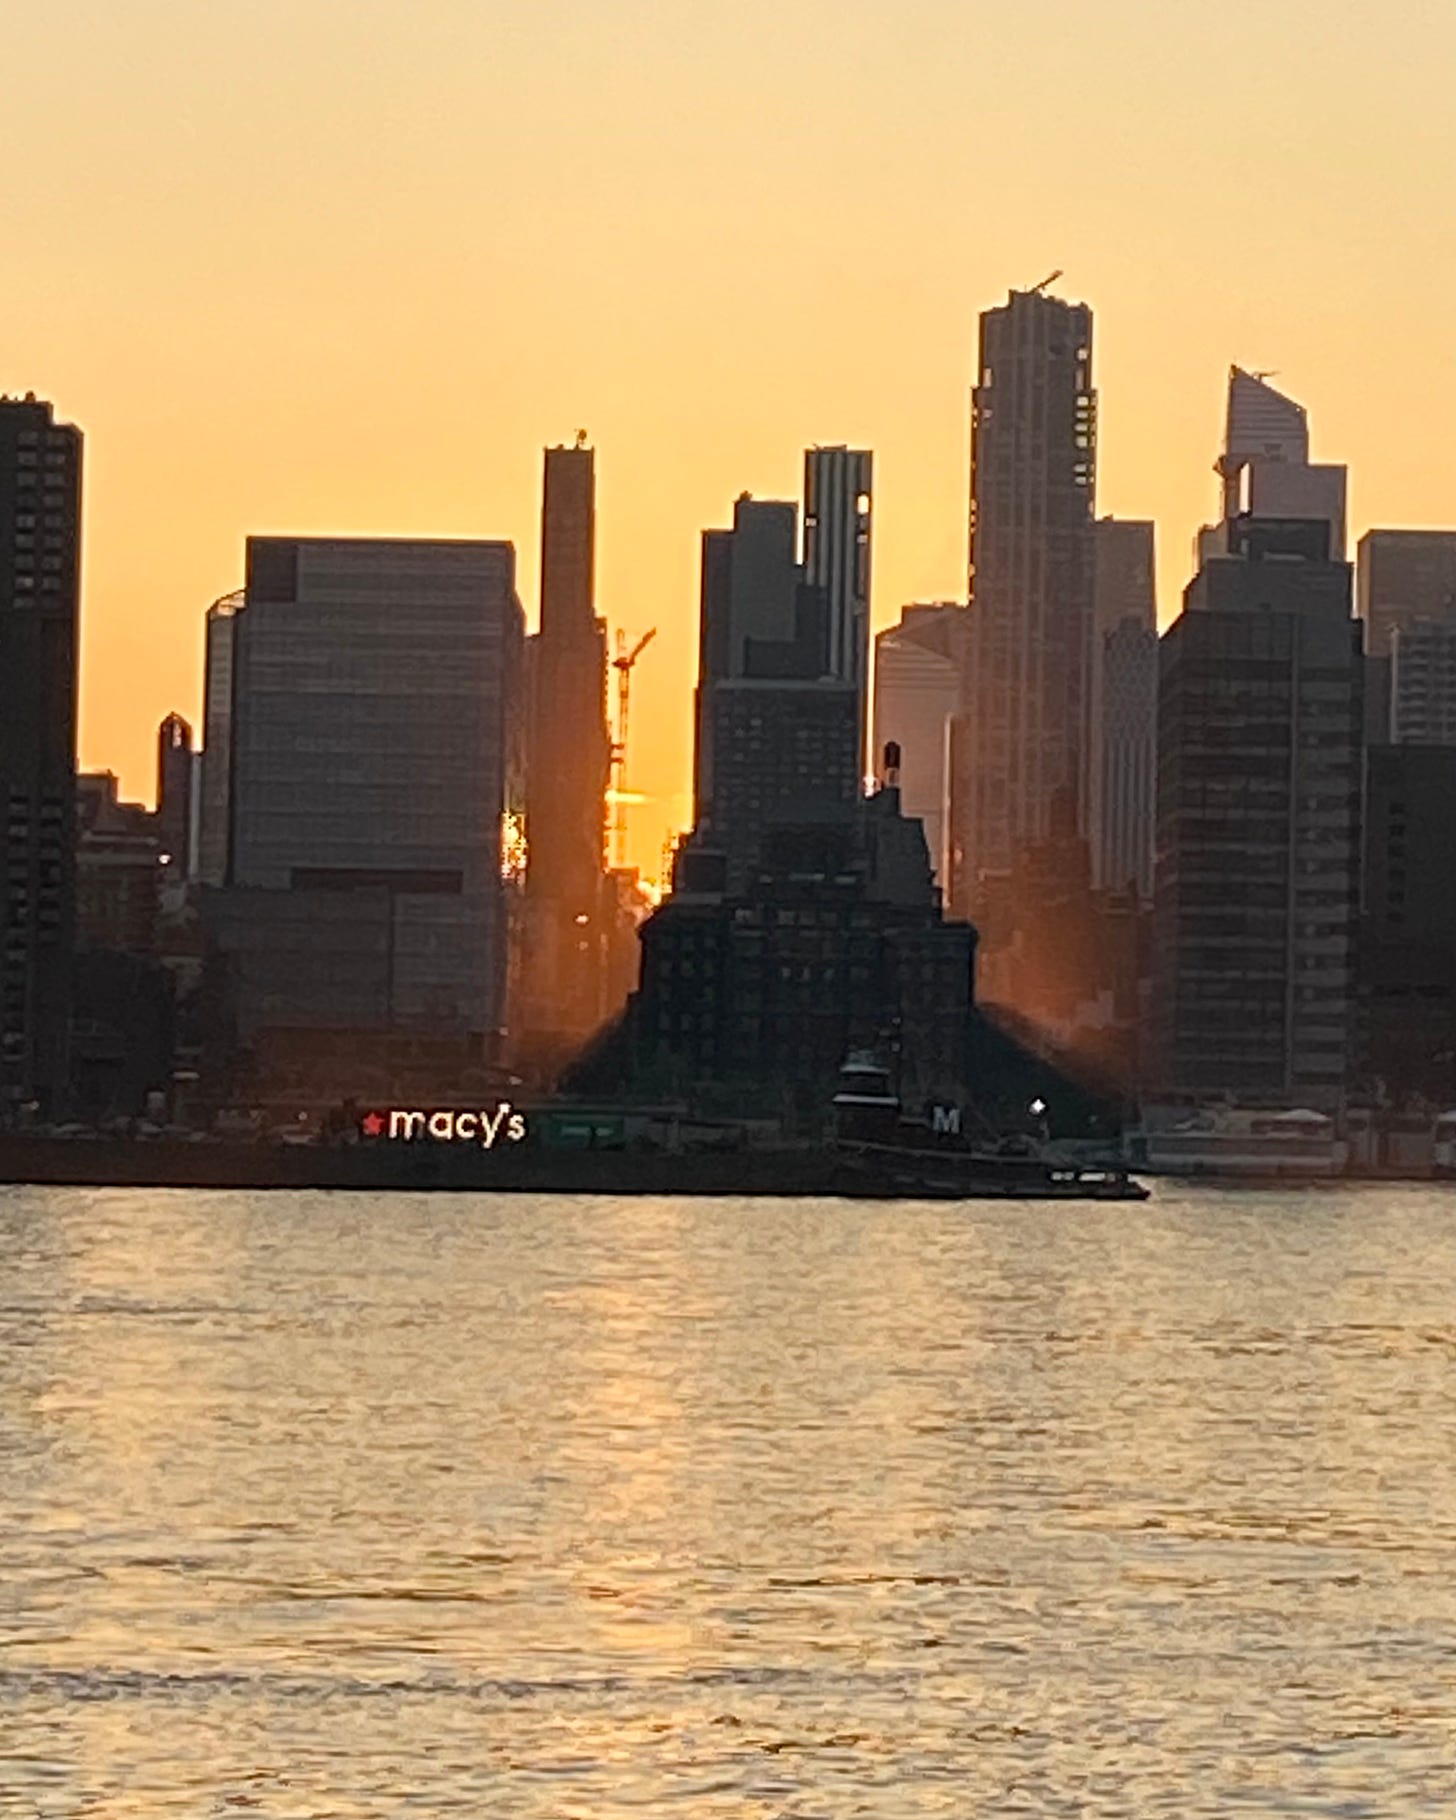 The sun setting as the Macy's barge on the East River begins to shine.